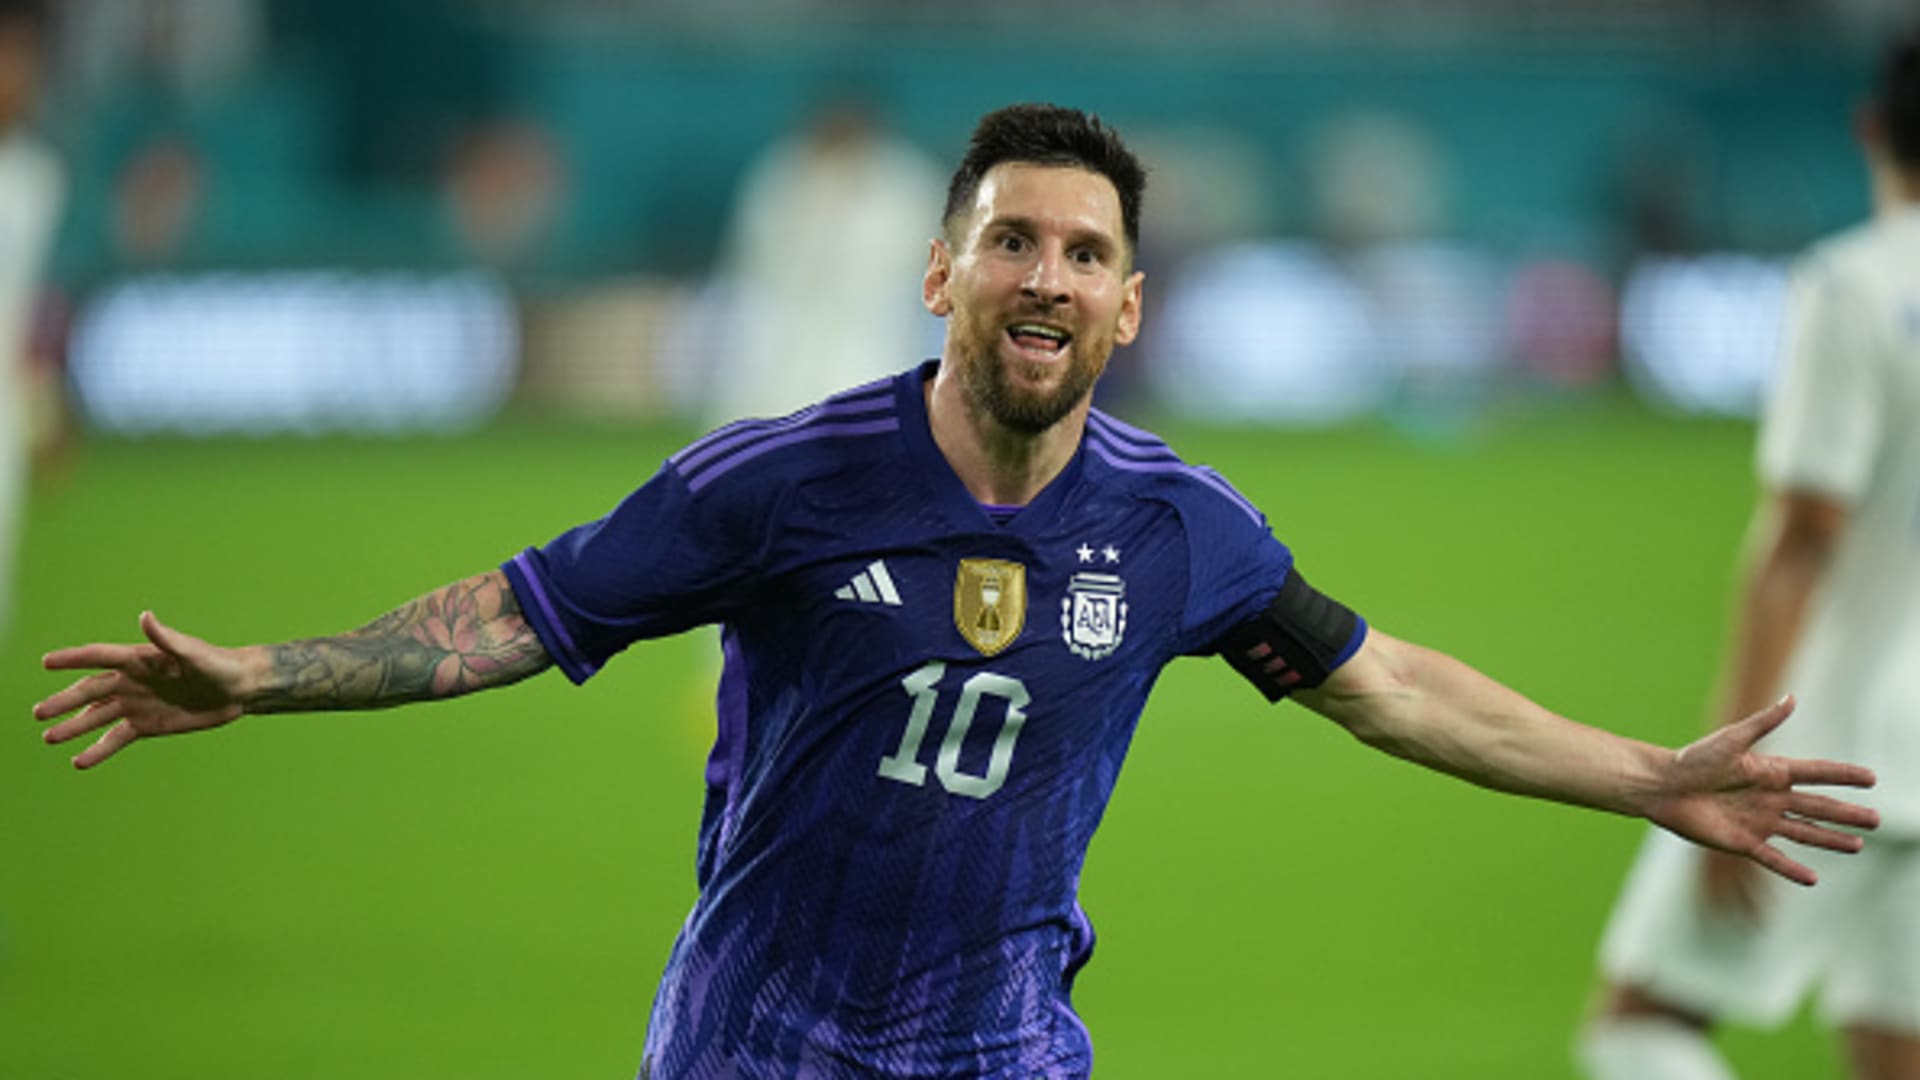 Lionel Messi is coming to Miami, and he’s boosting MLS ticket sales big time